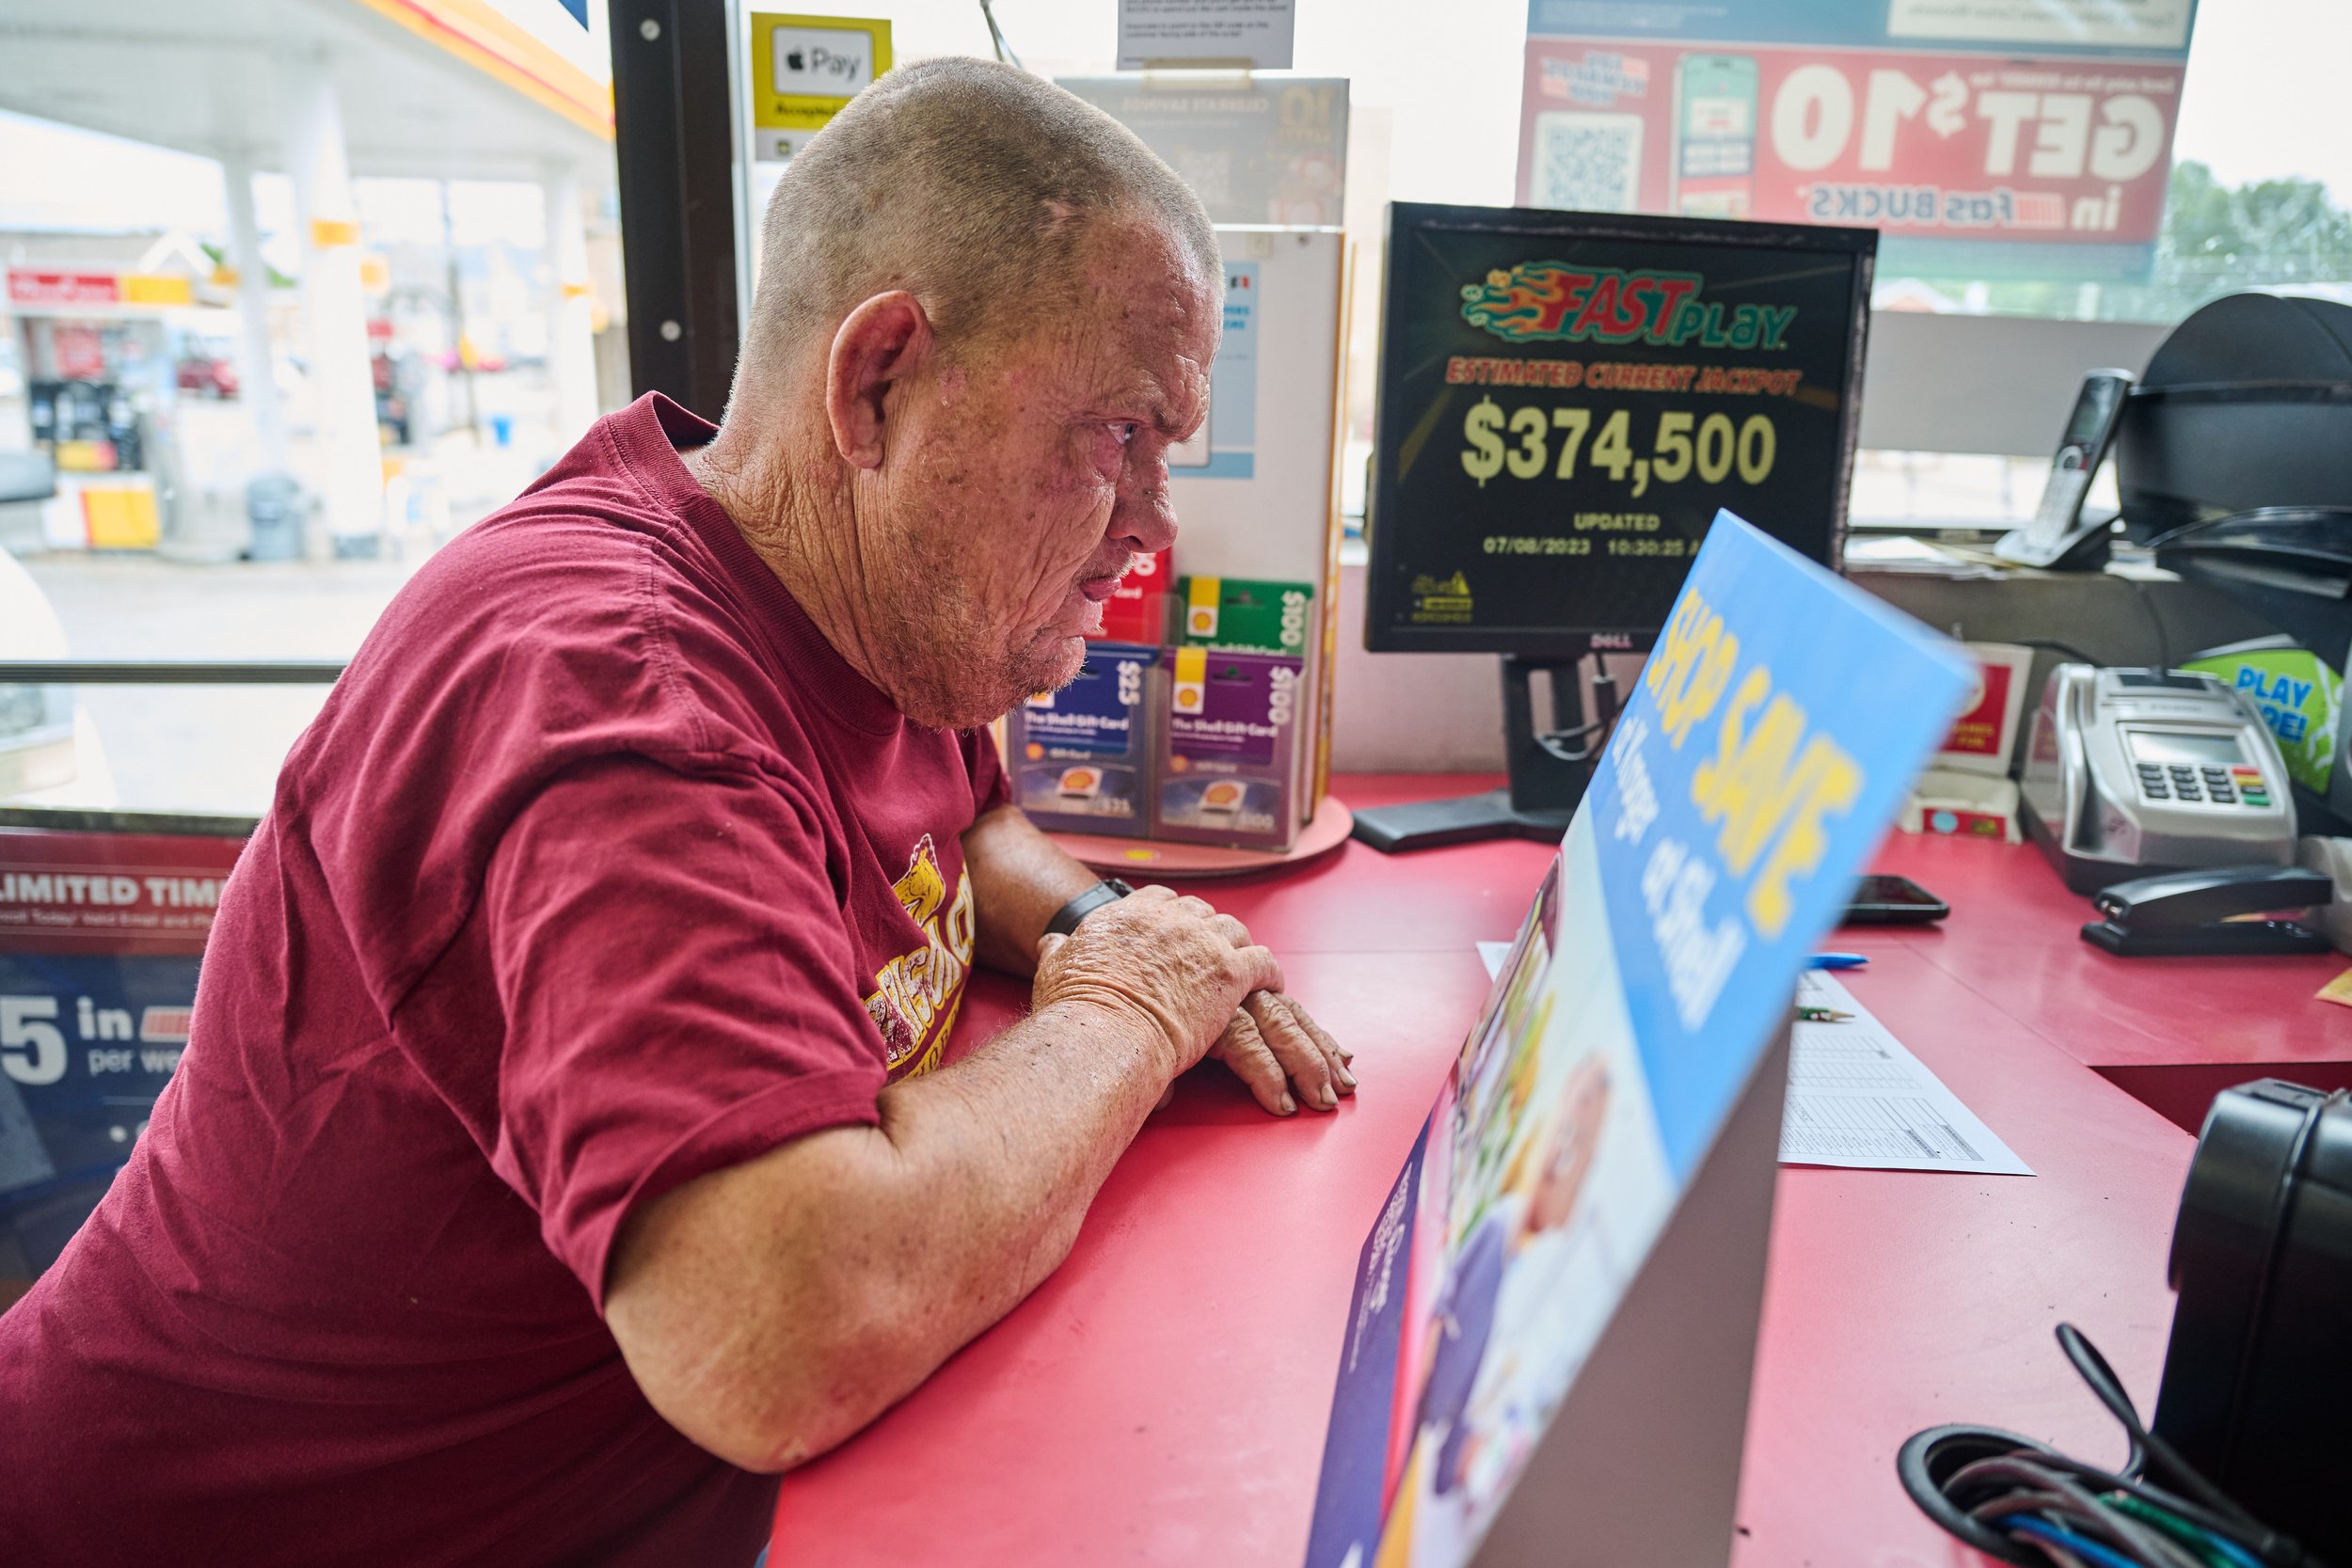  7/8/23—Cynthiana, Kentucky — “They just throw the money away,” Fryman said, staring angrily past the counter after watching a gas station customer check out with $75 in lottery tickets. Fryman buys $1 tickets occasionally, but cashier Lisa Philpot o